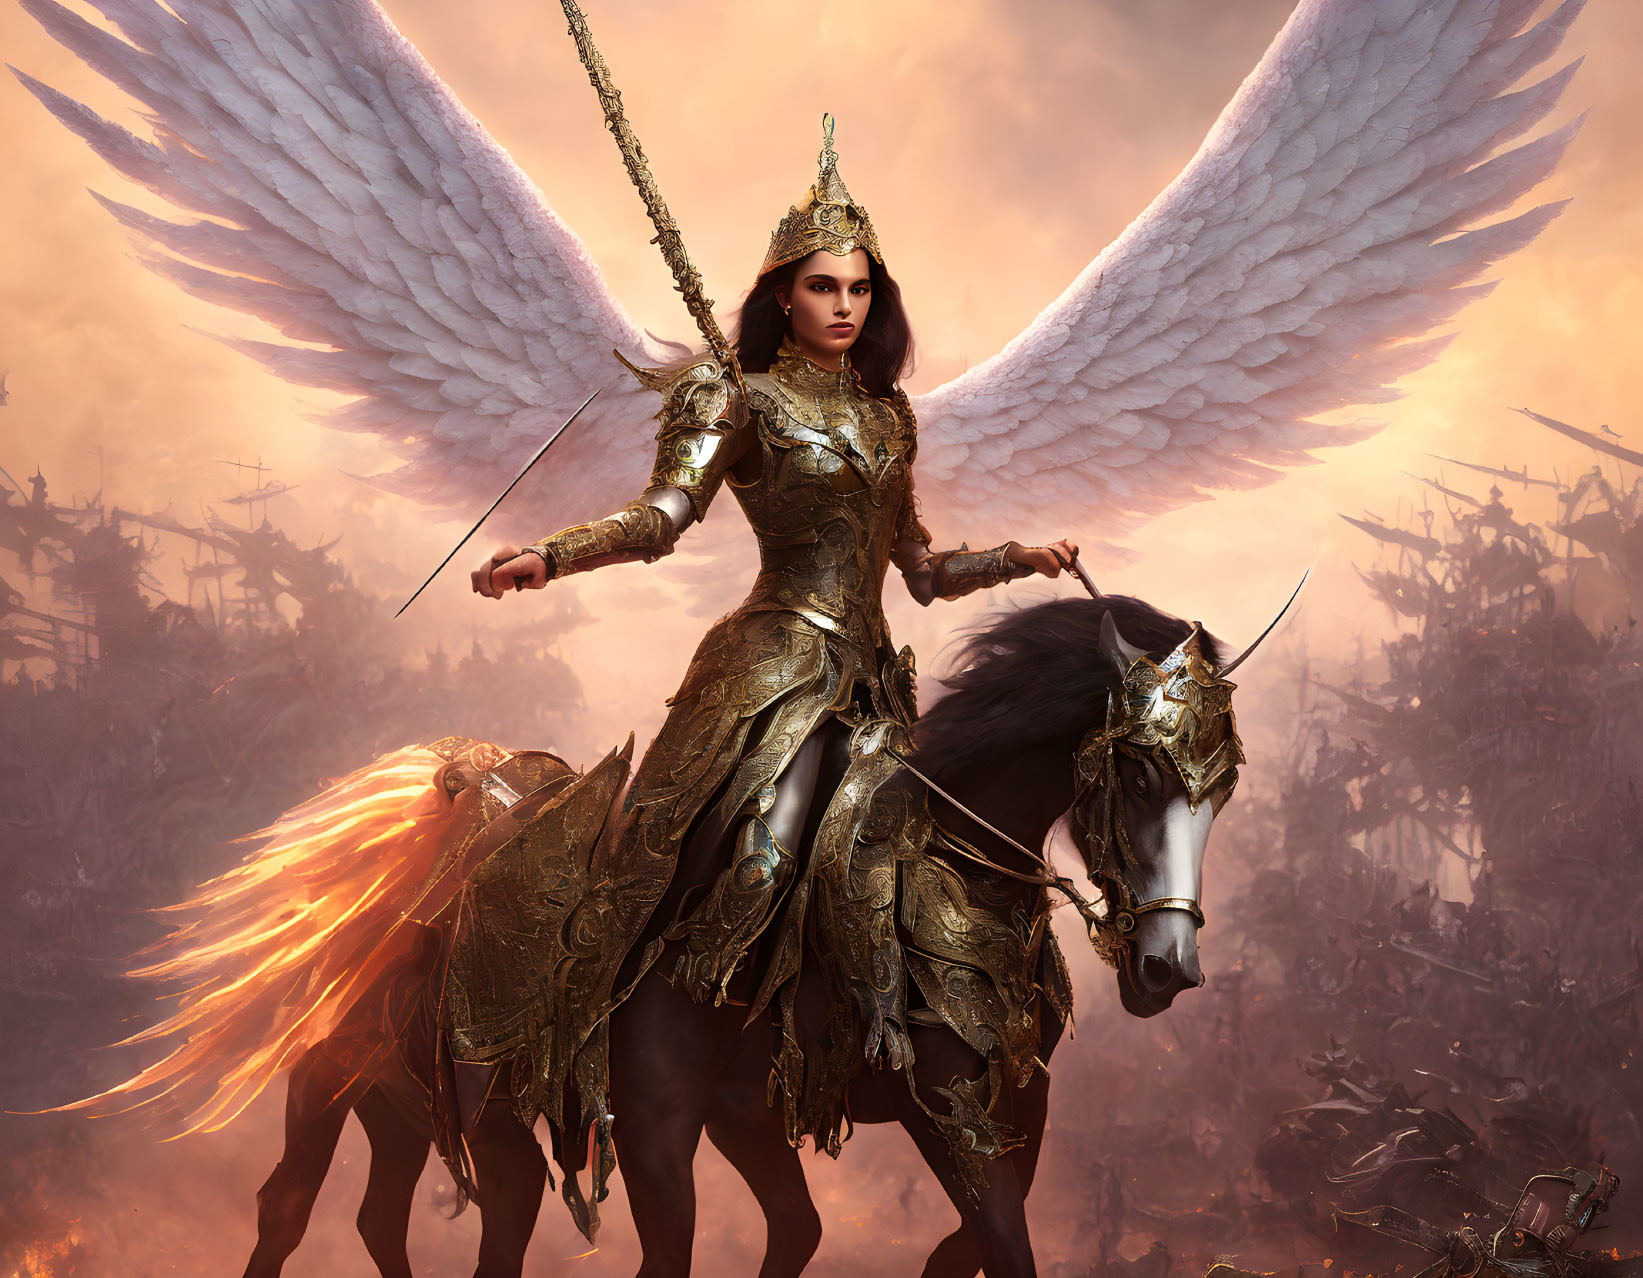 Golden-armored warrior on white horse with spear and wings, fiery battlefield.